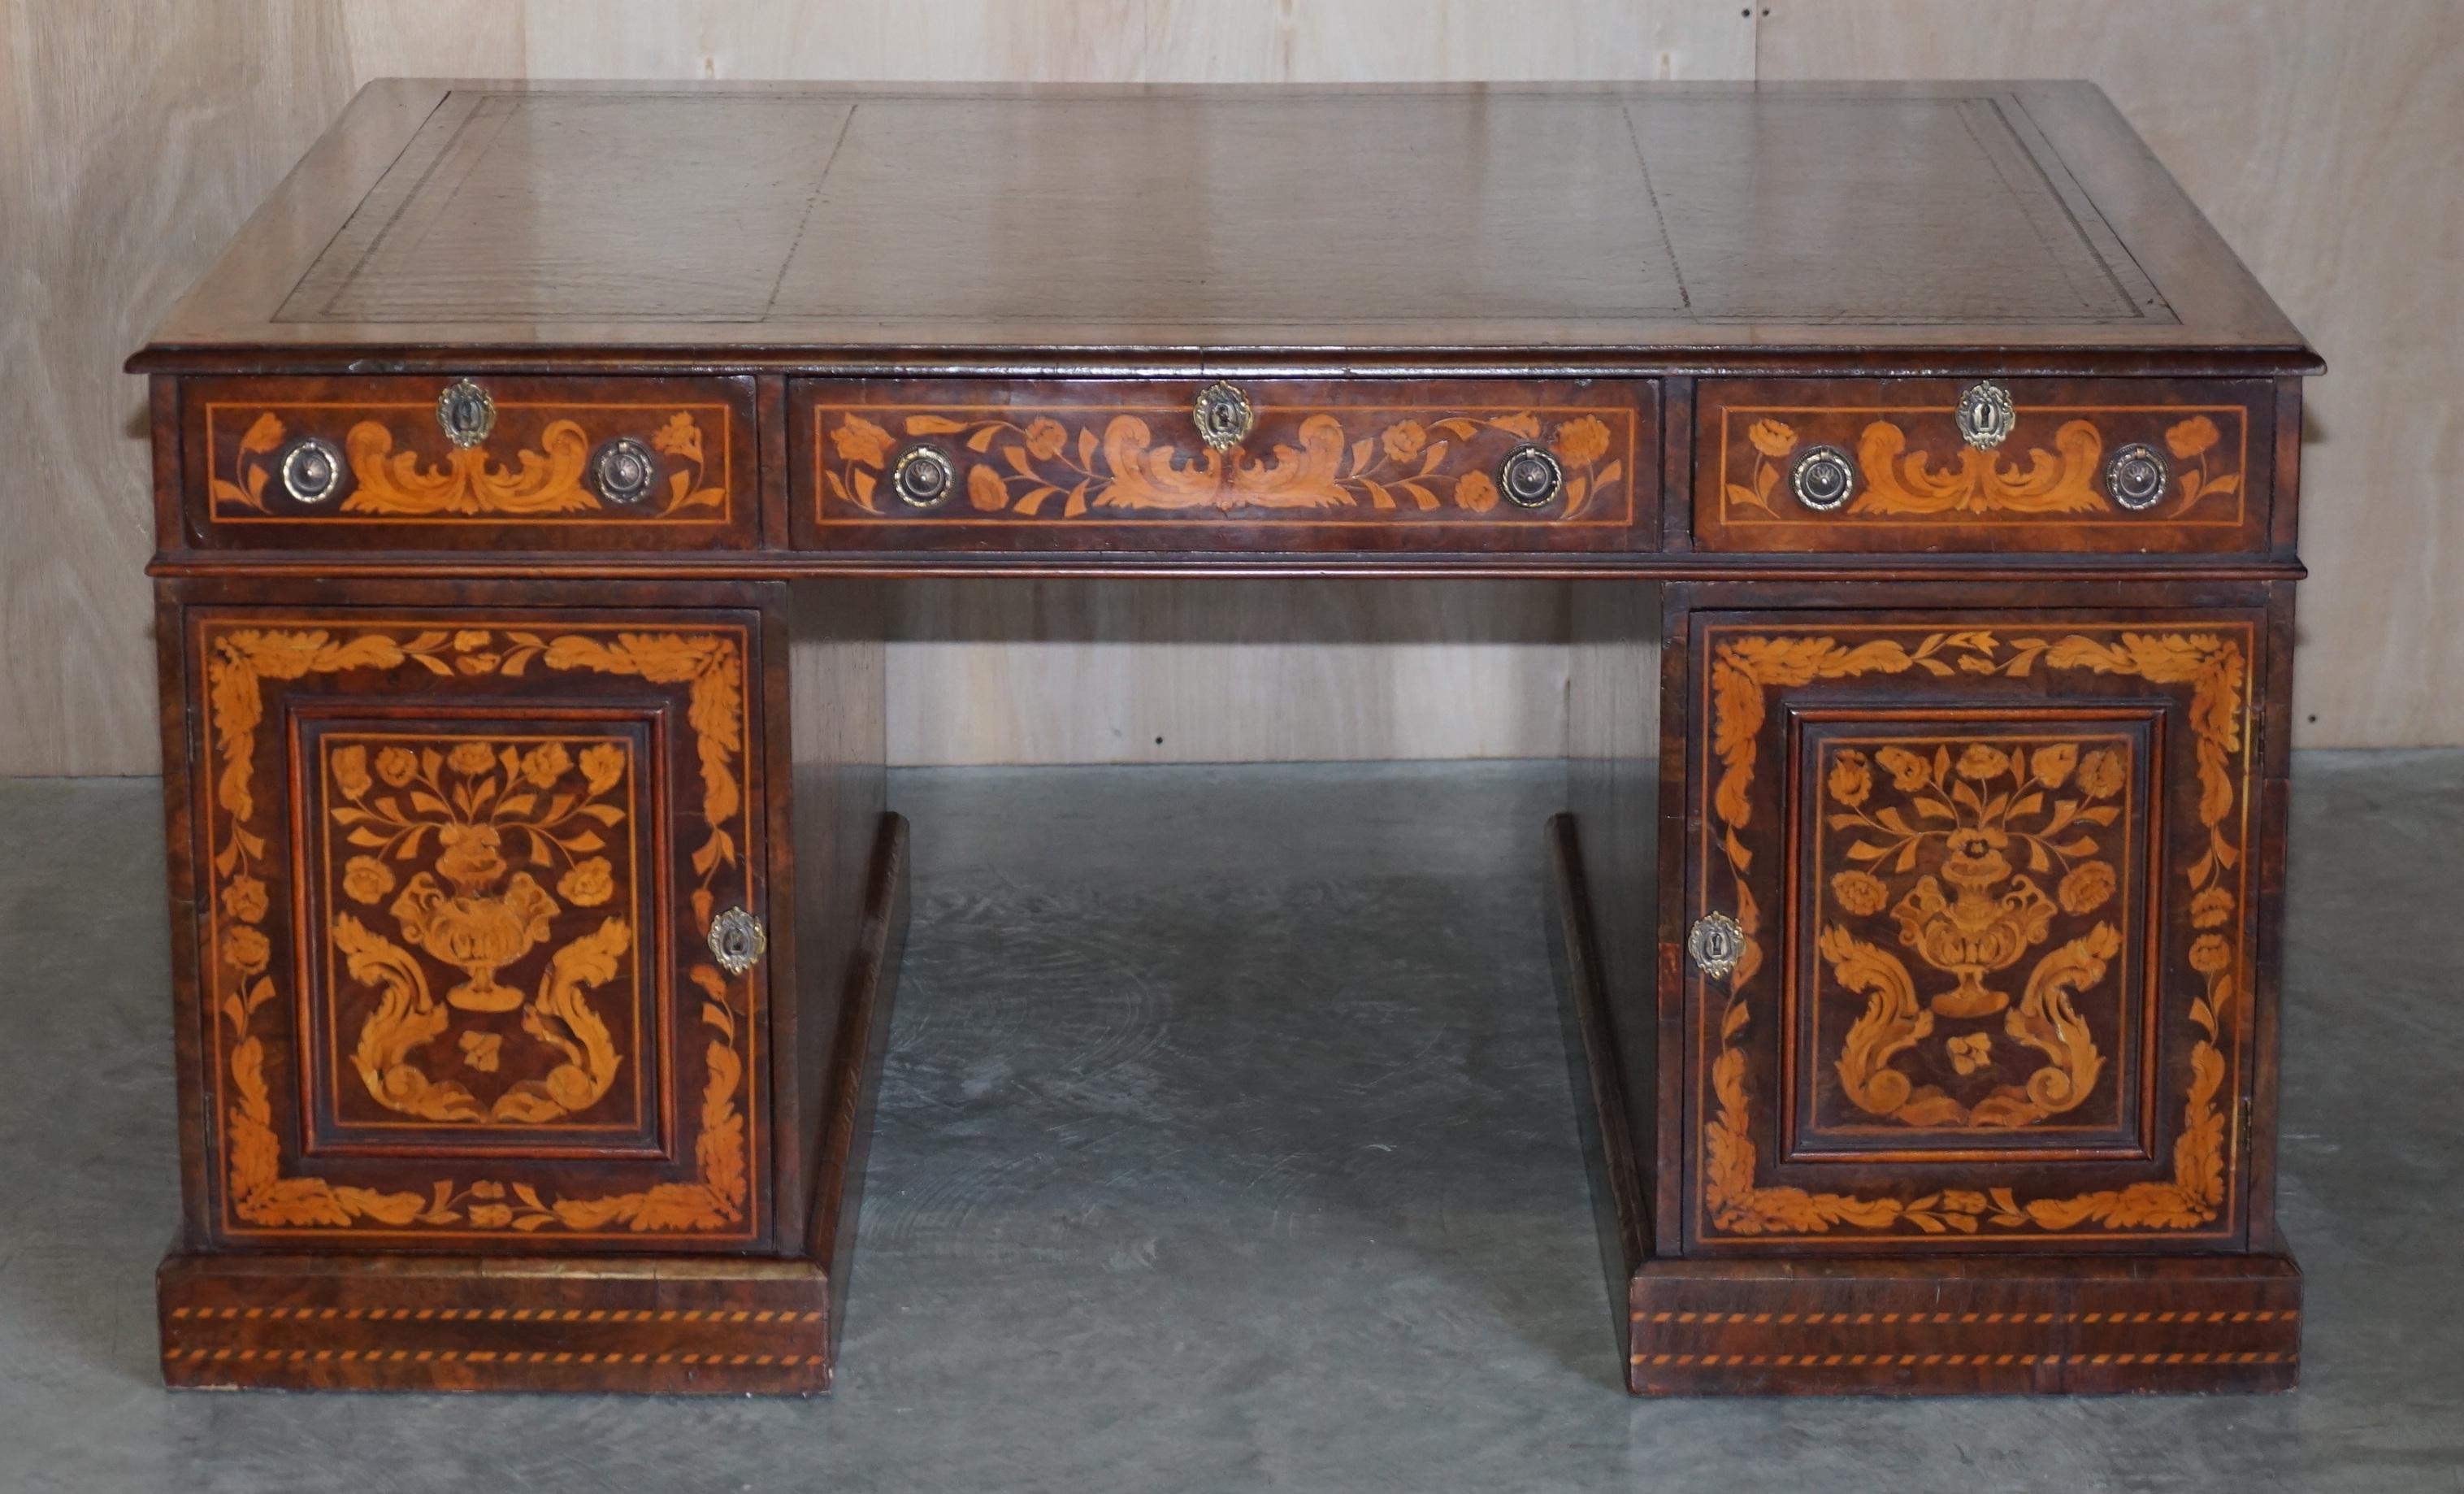 Antique Restored Dutch Marquetry Inlaid Double Sided Twin Pedestal Partners Desk For Sale 1